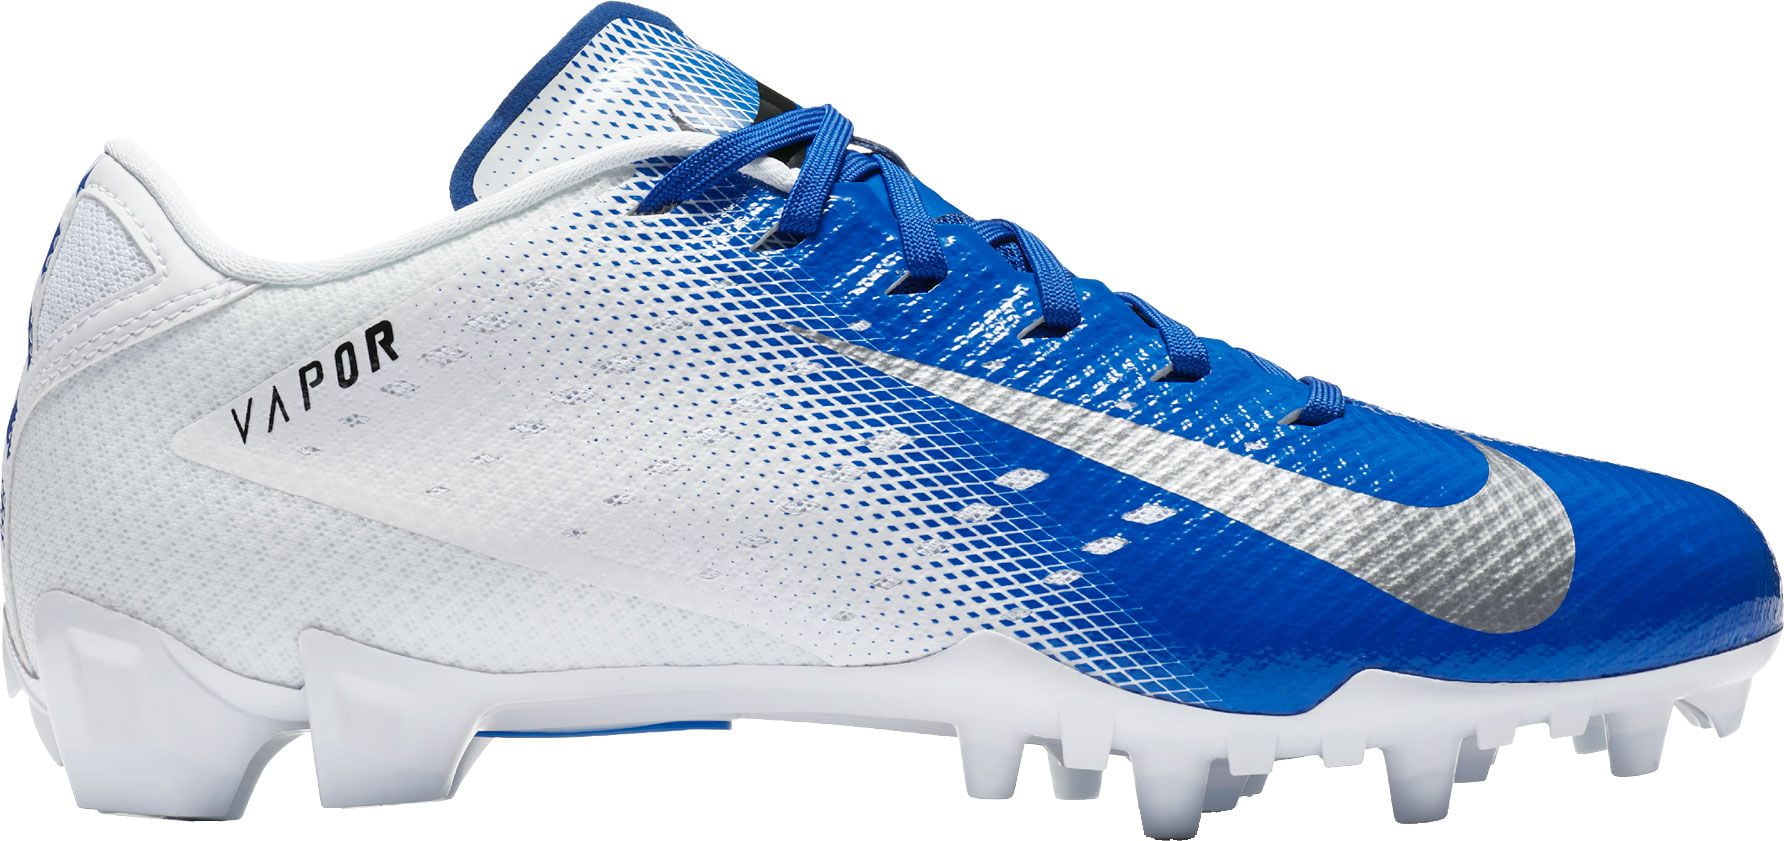 nike football shoes blue and white